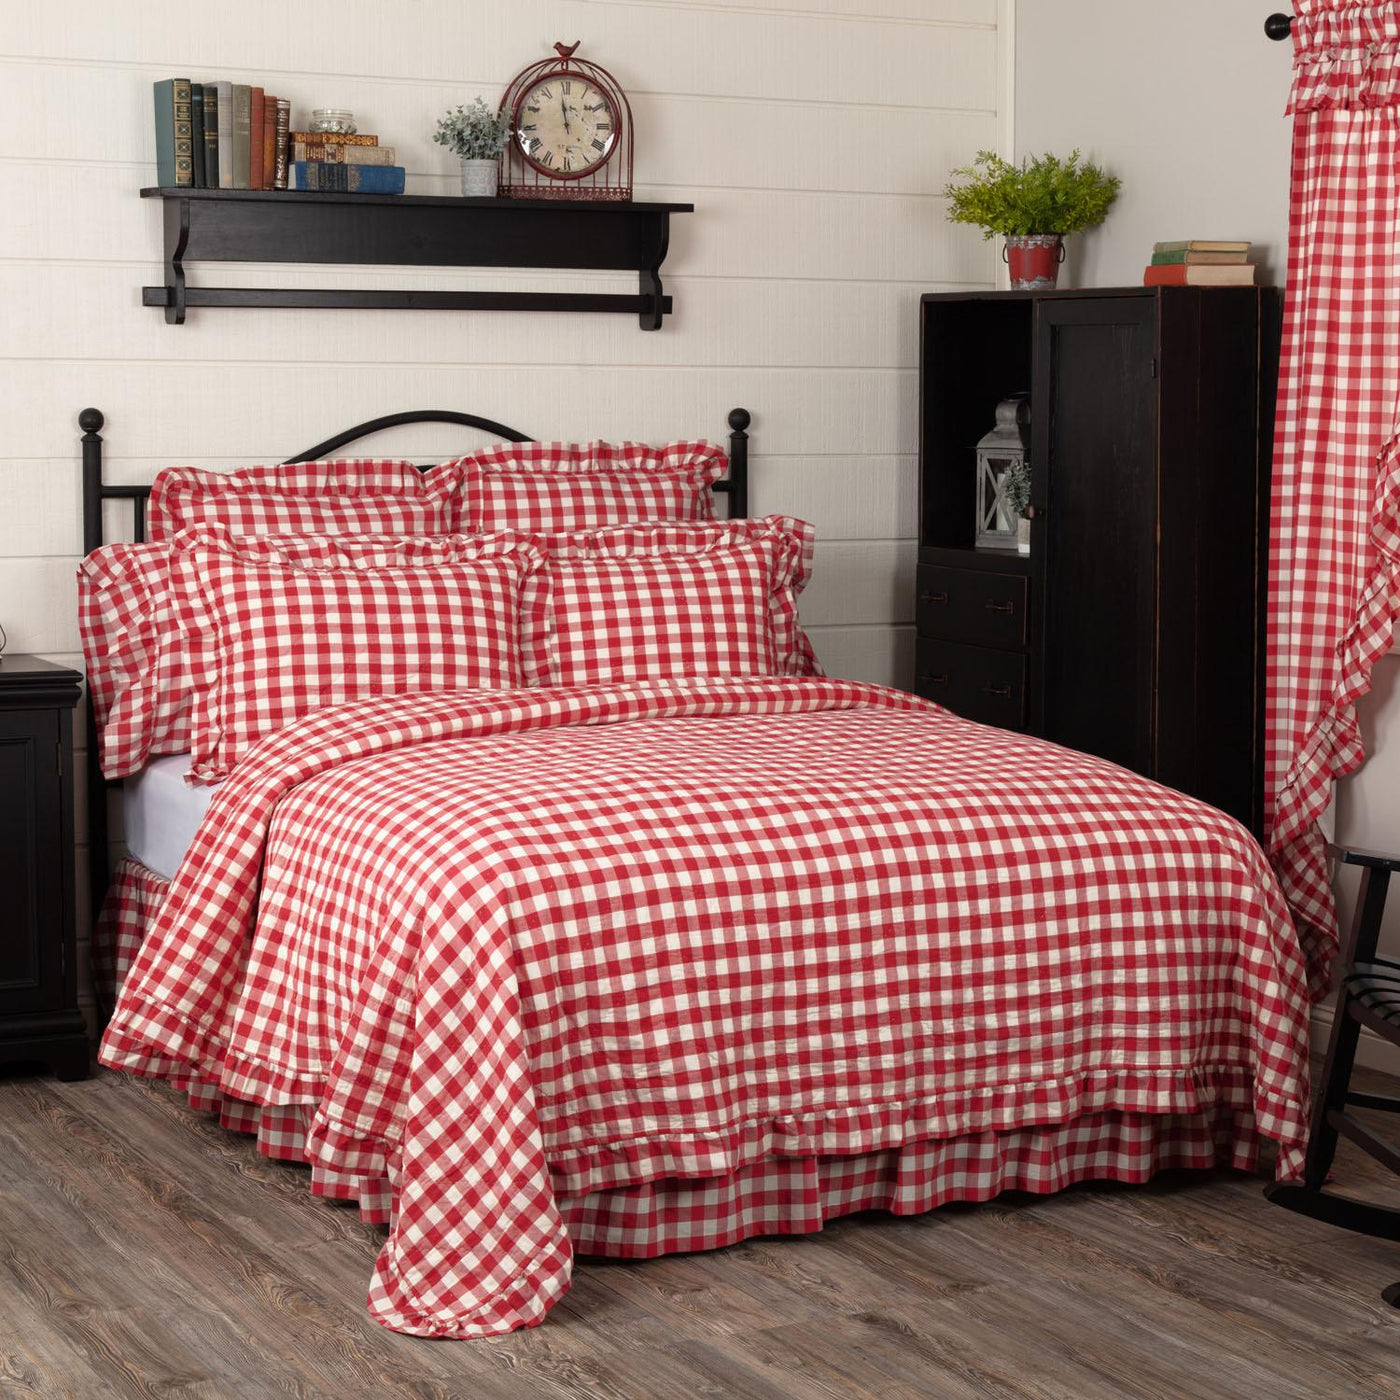 Kuna Queen Ruffled Quilt - Red/White